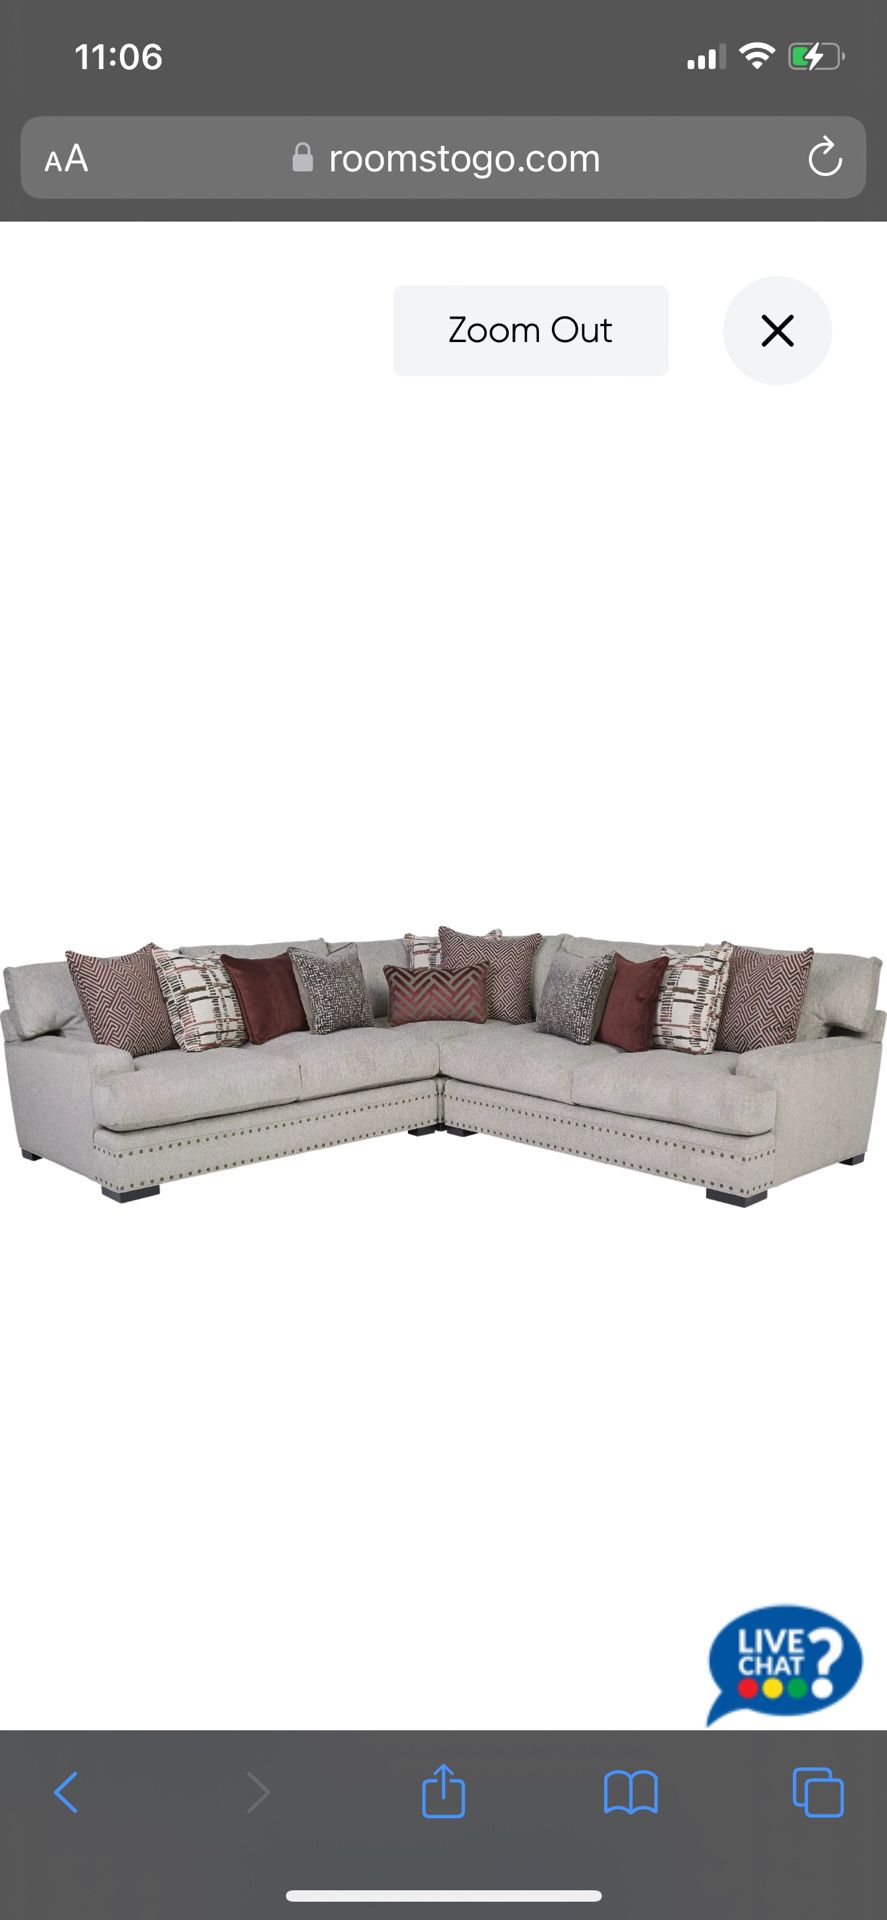 Comfy Cindy Crawford sectional sofa for sale